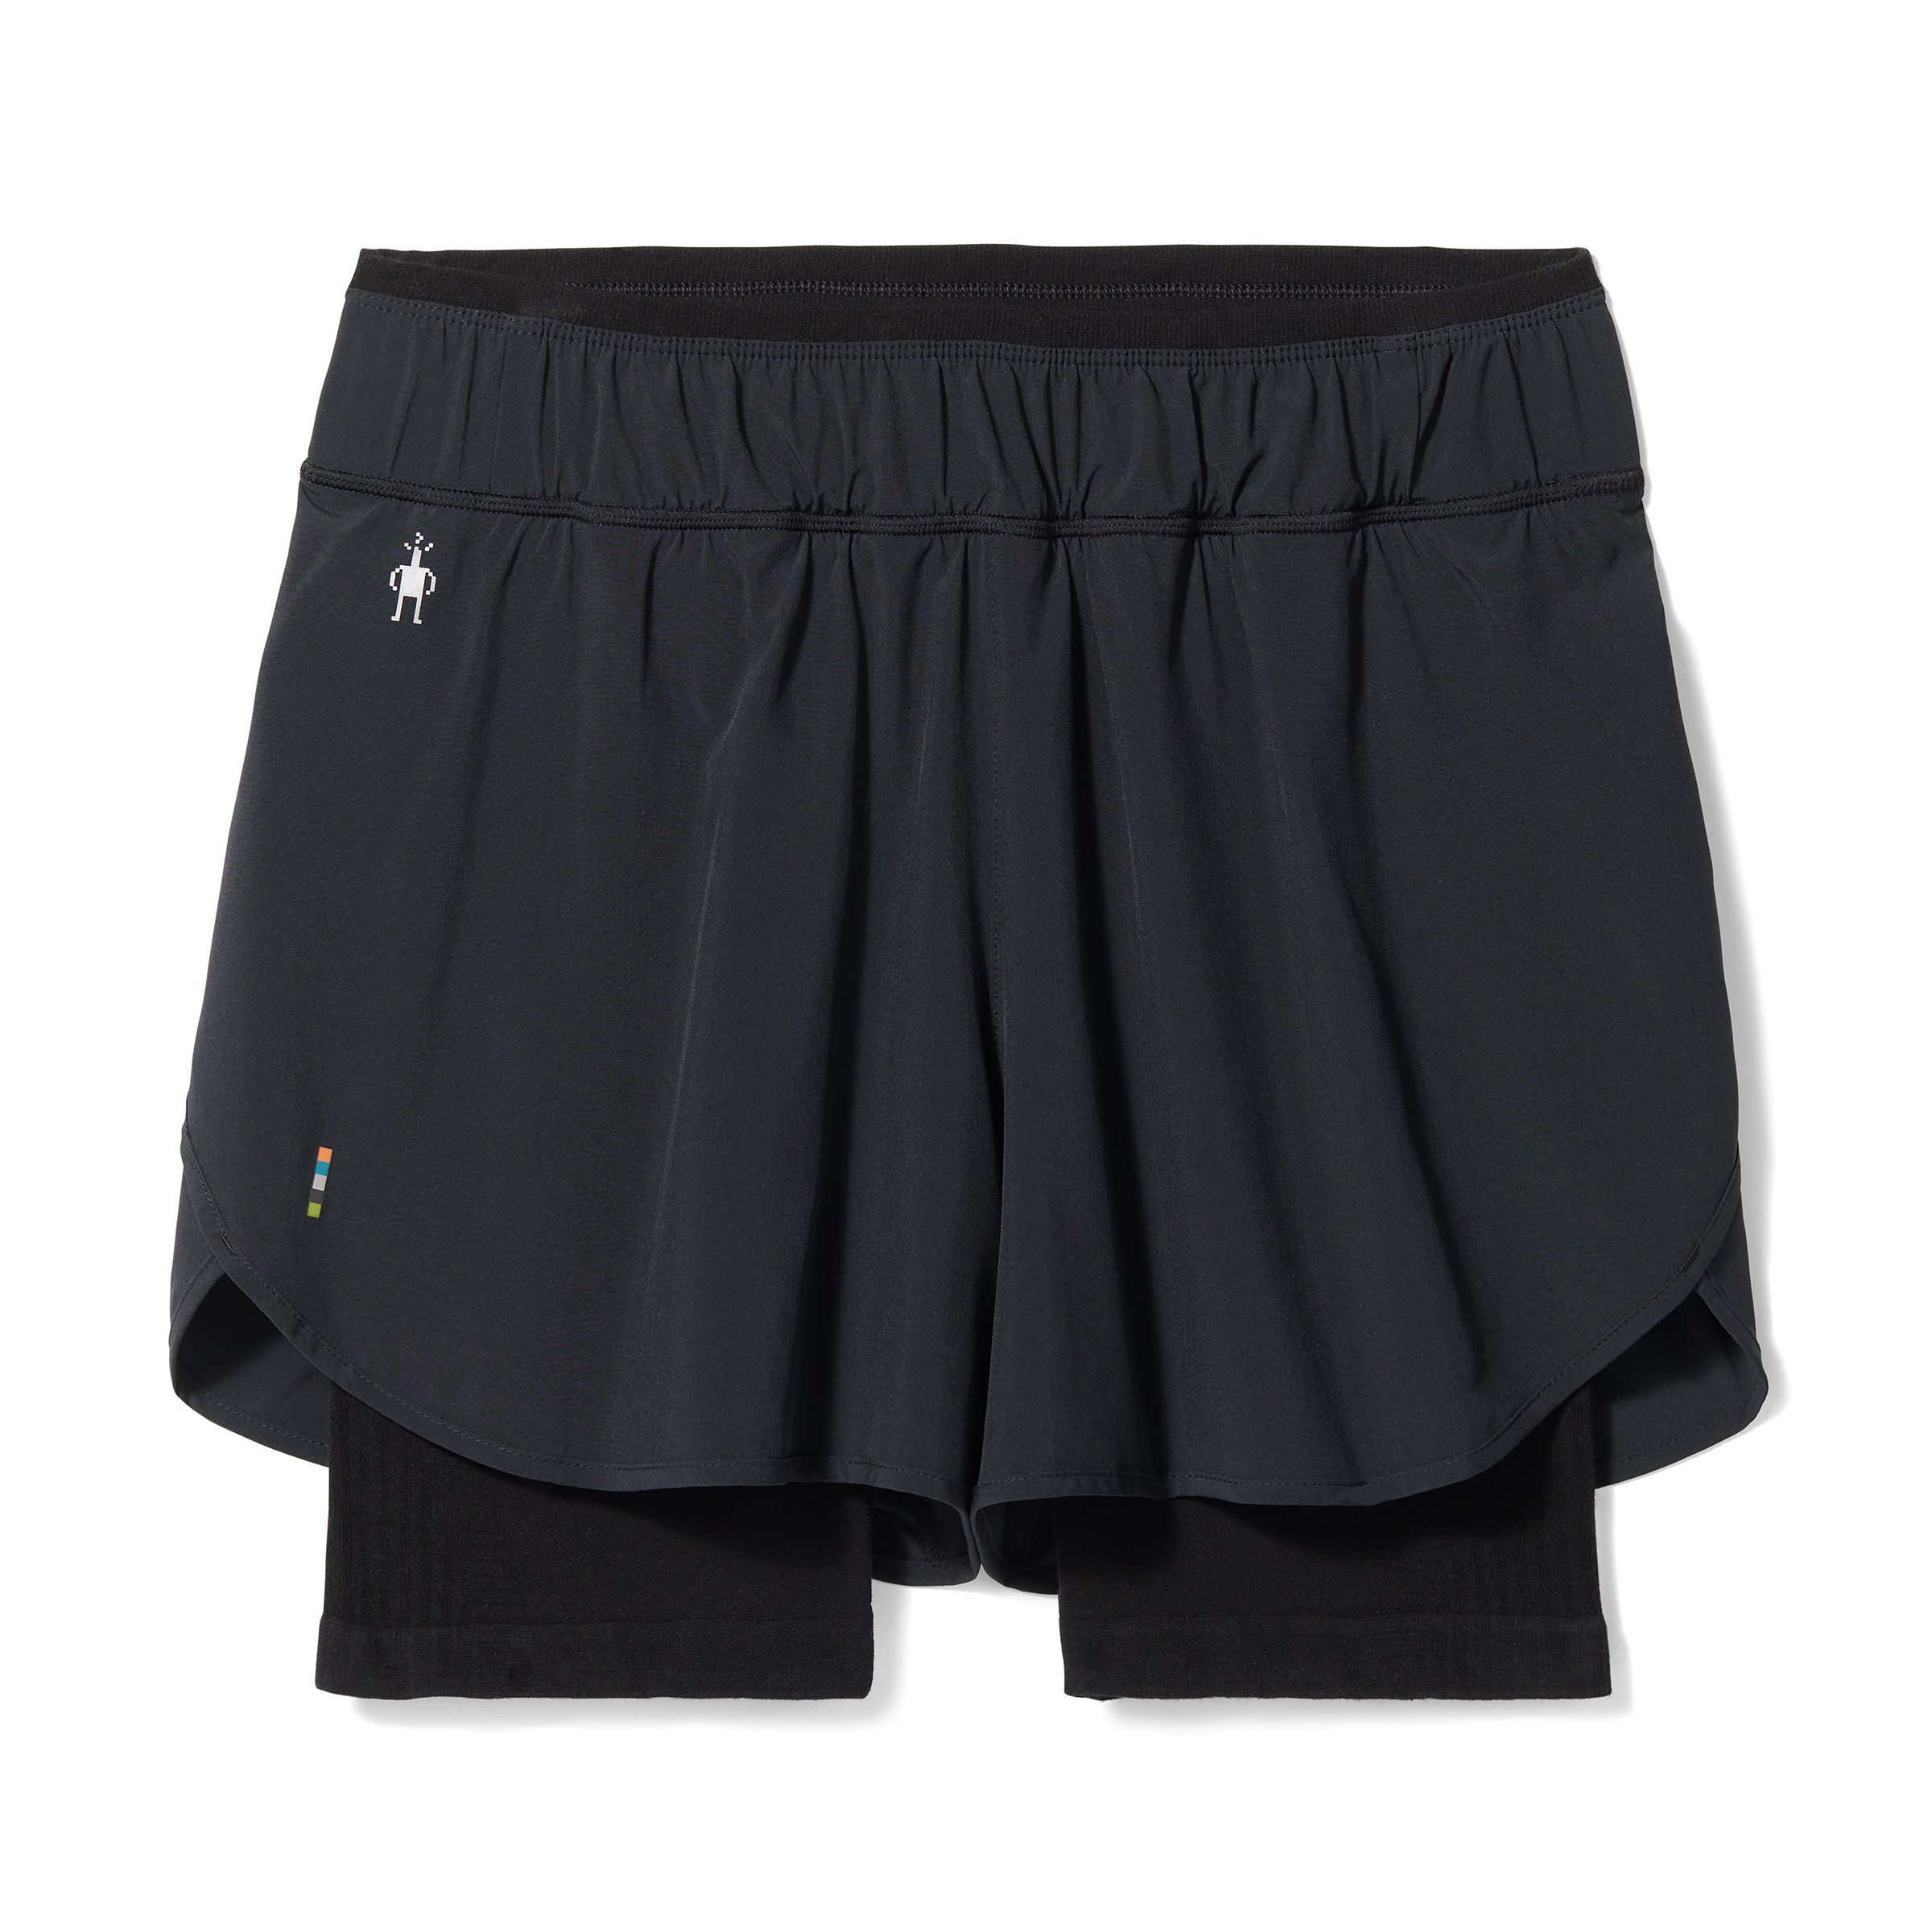 P04475 - Wave - Athletic Short with Pockets - Toronto Apparel